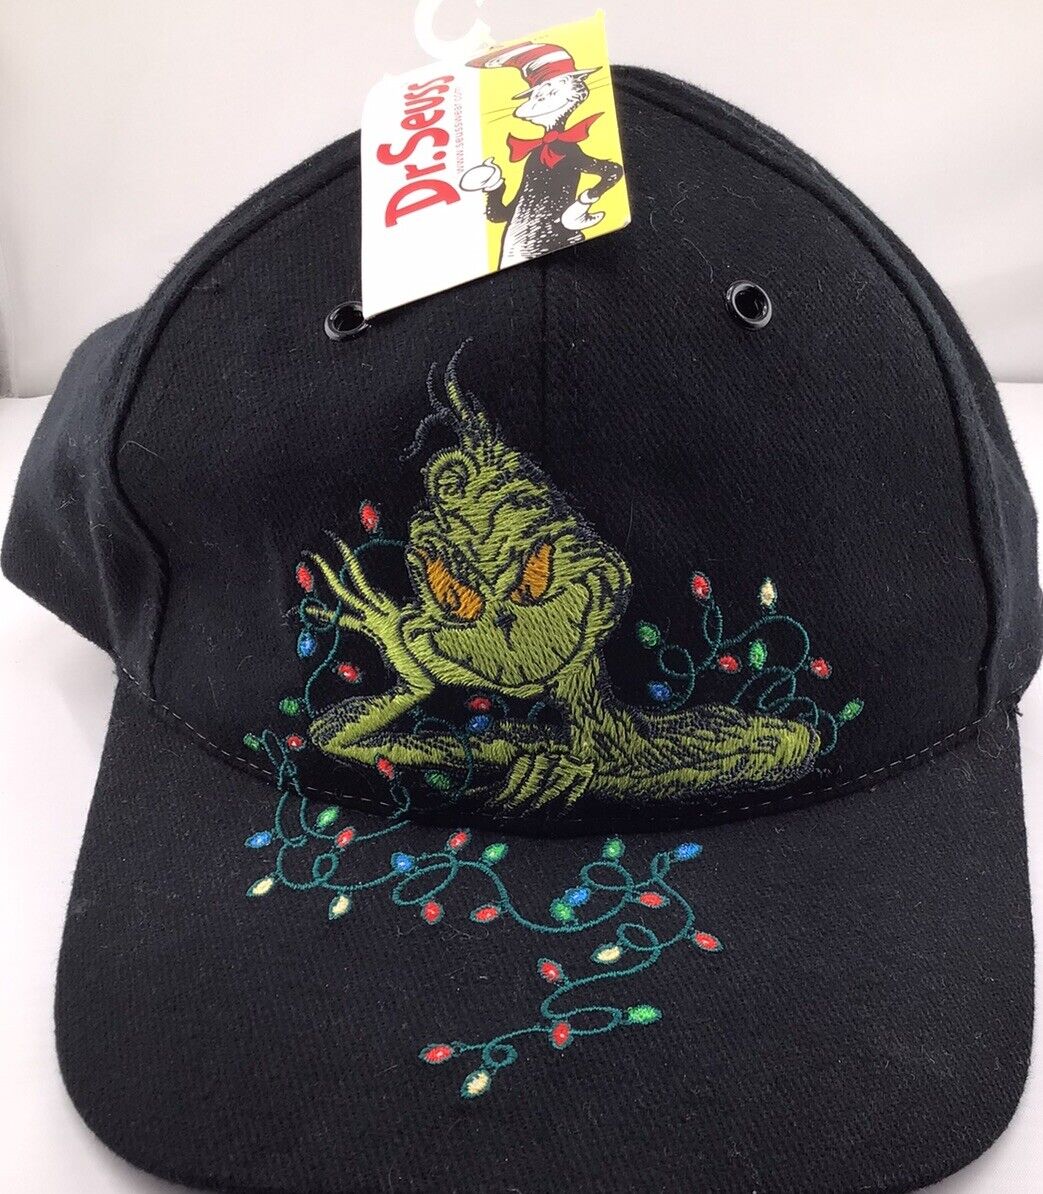 1997 Dr. Seuss Embroidered GRINCH Christmas Black Cap NWT Adjustable